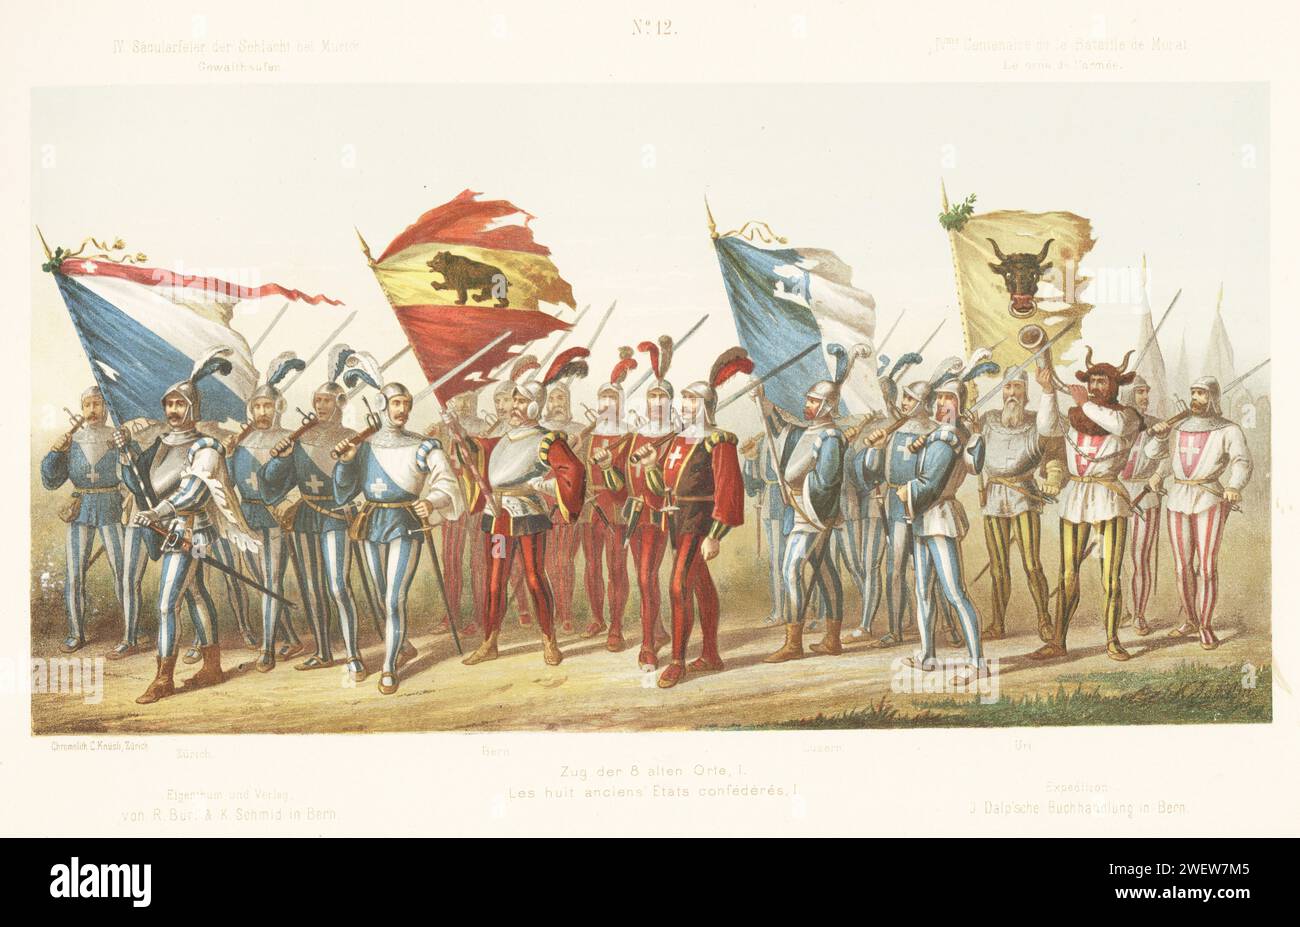 Troops from the Eight Old Swiss states of the Confederacy: Zurich, Bern, Lucerne, and Uri. With long swords, ensigns with standards, trumpeter in bull-head helmet. Chromolithograph by C. Knusli after an illustration by Carl Jauslin from Album du Cortege Historique de Morat, reenactment pageant on the 400th anniversary of the Battle of Murten, Buri, Zurich, 1876. Stock Photo